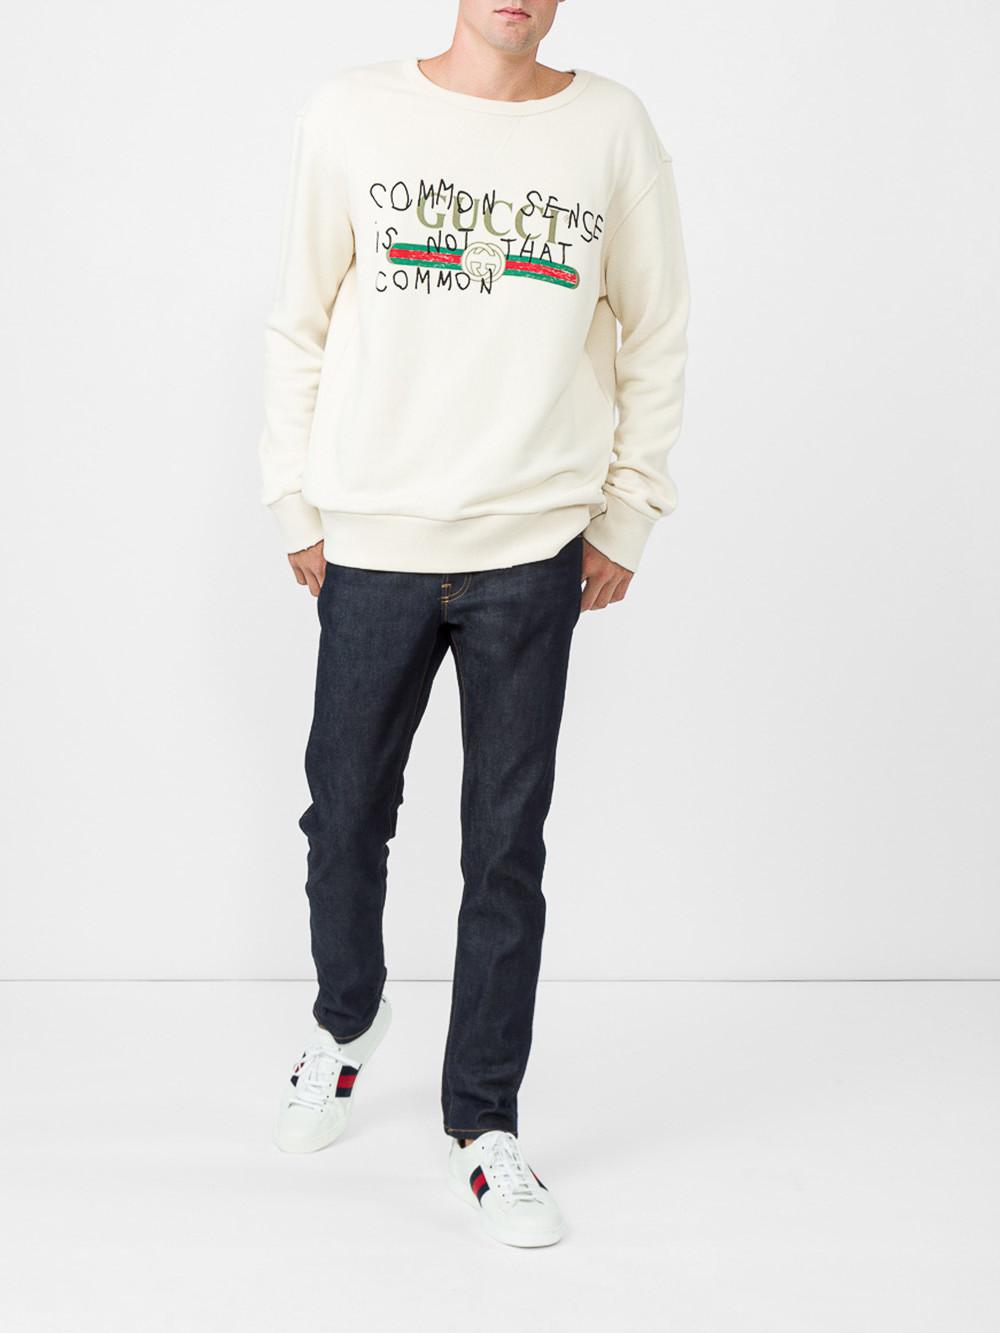 Buy Gucci Sweatshirt Common Sense Is Not That Common | UP TO 50% OFF